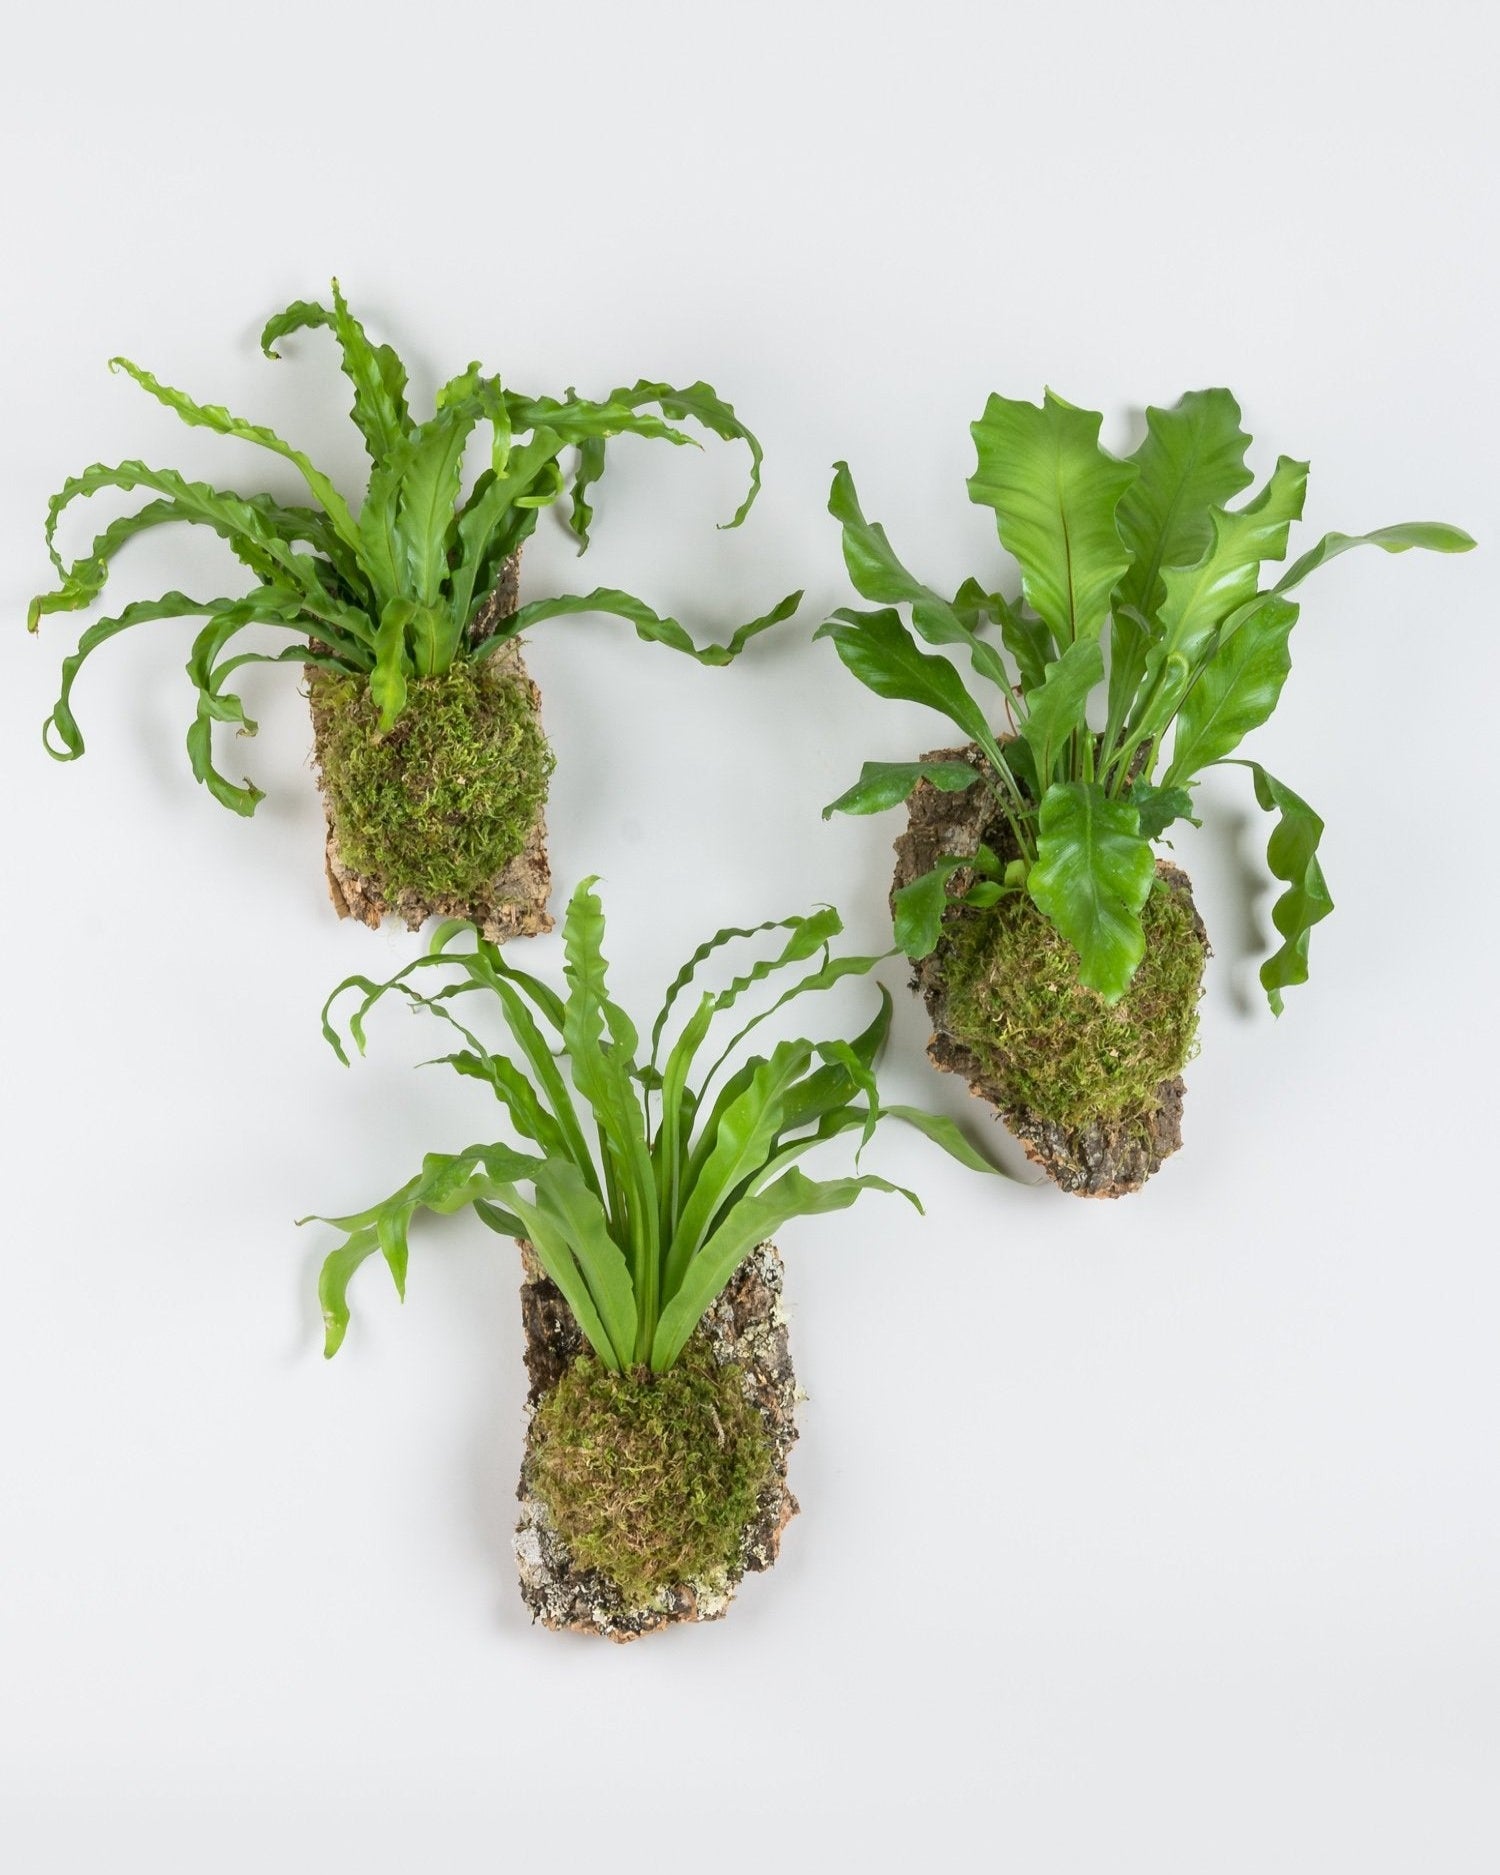 Three Bird's Nest Fern Cork Mounts hung in a triangle formation on white background